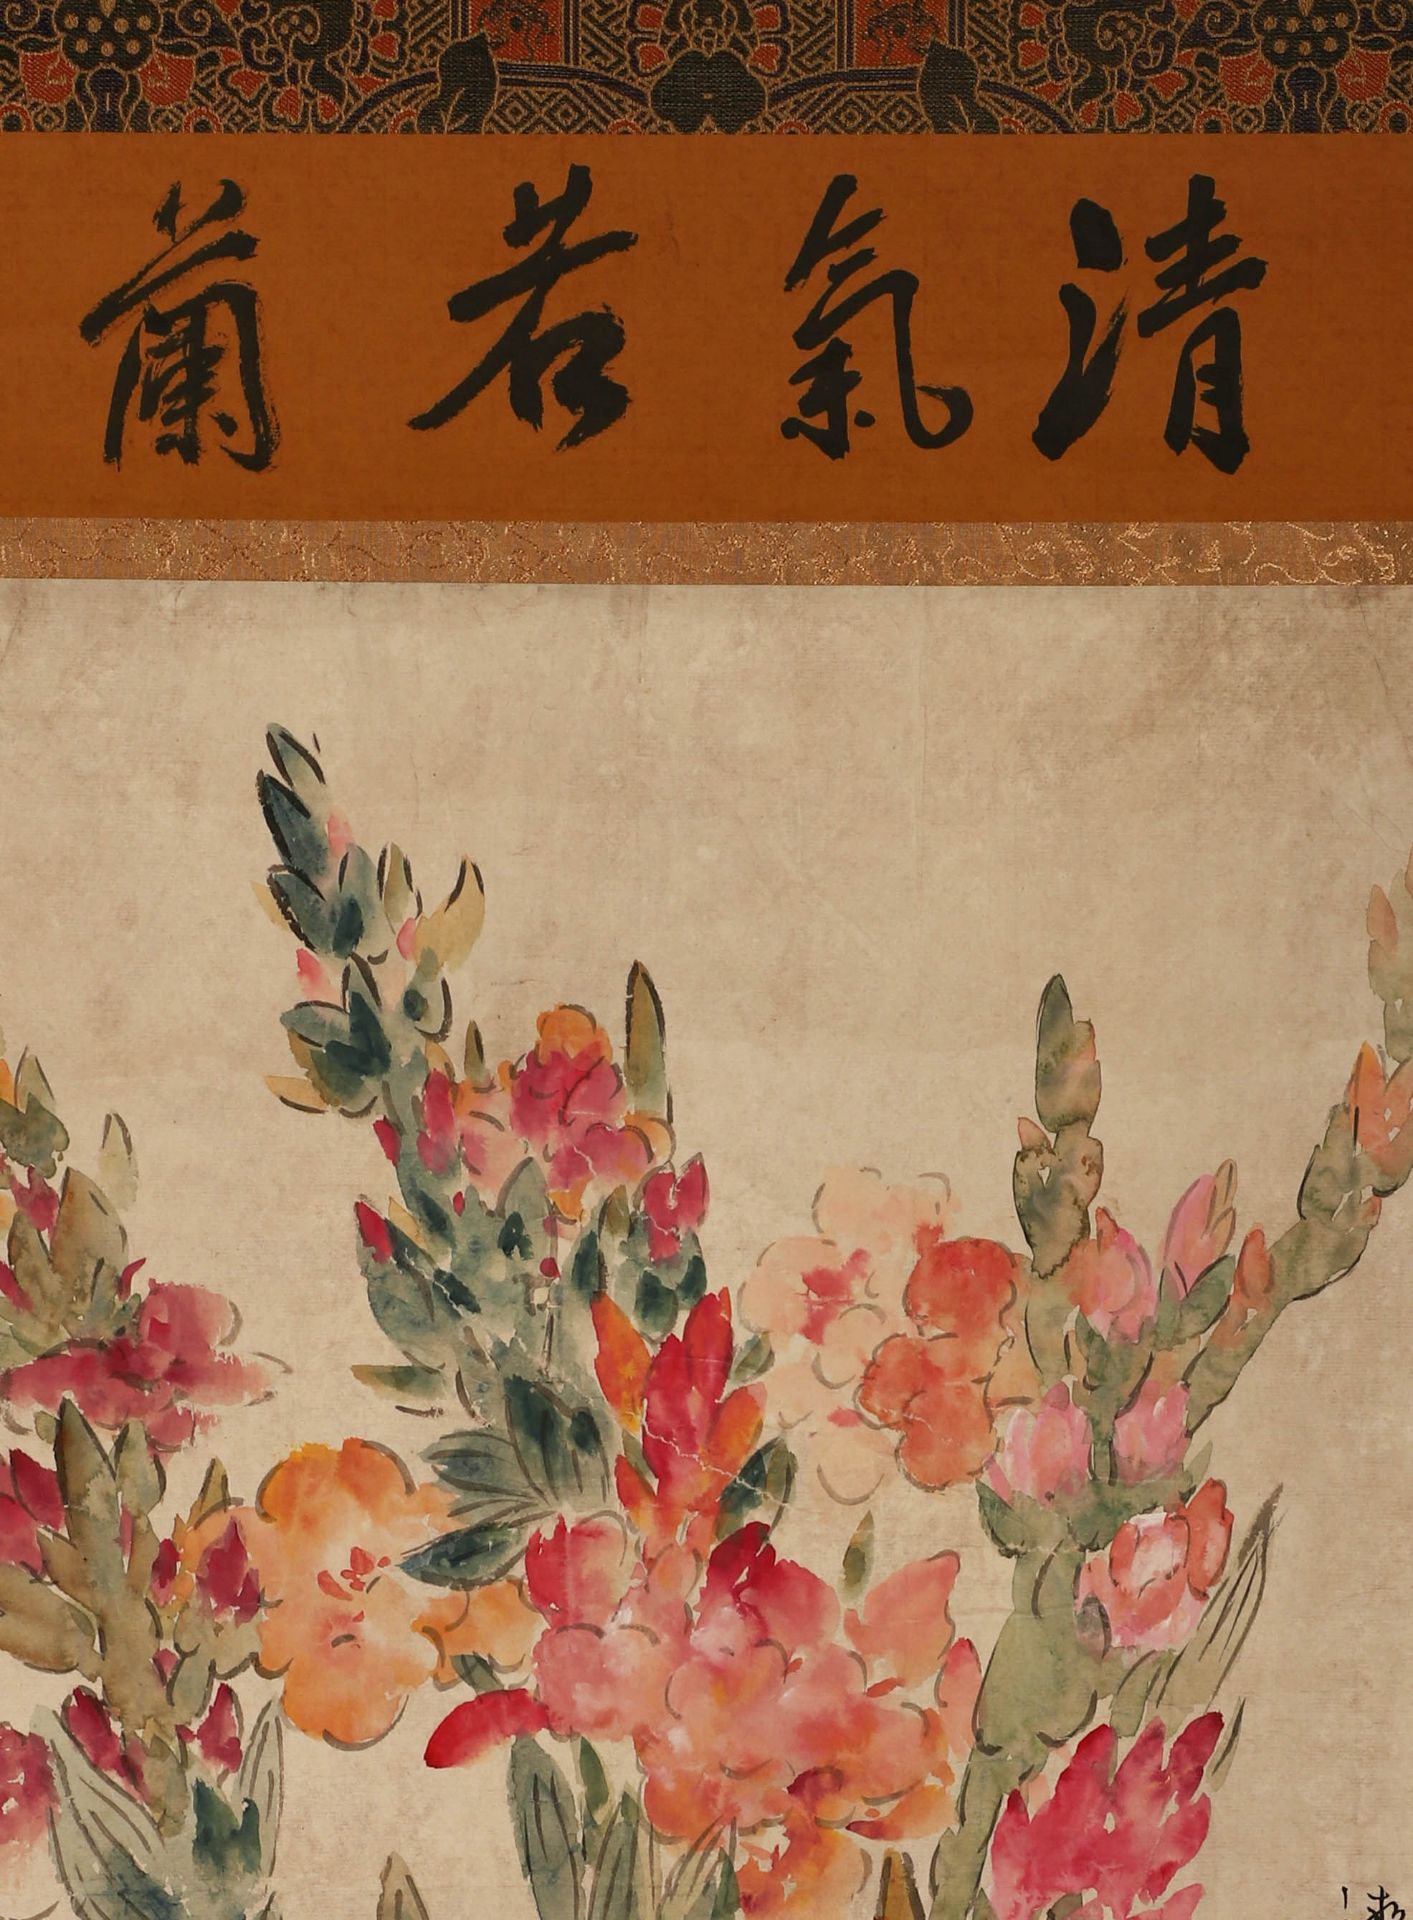 Flowers painting on paper by Xu Beihong  - Image 16 of 22